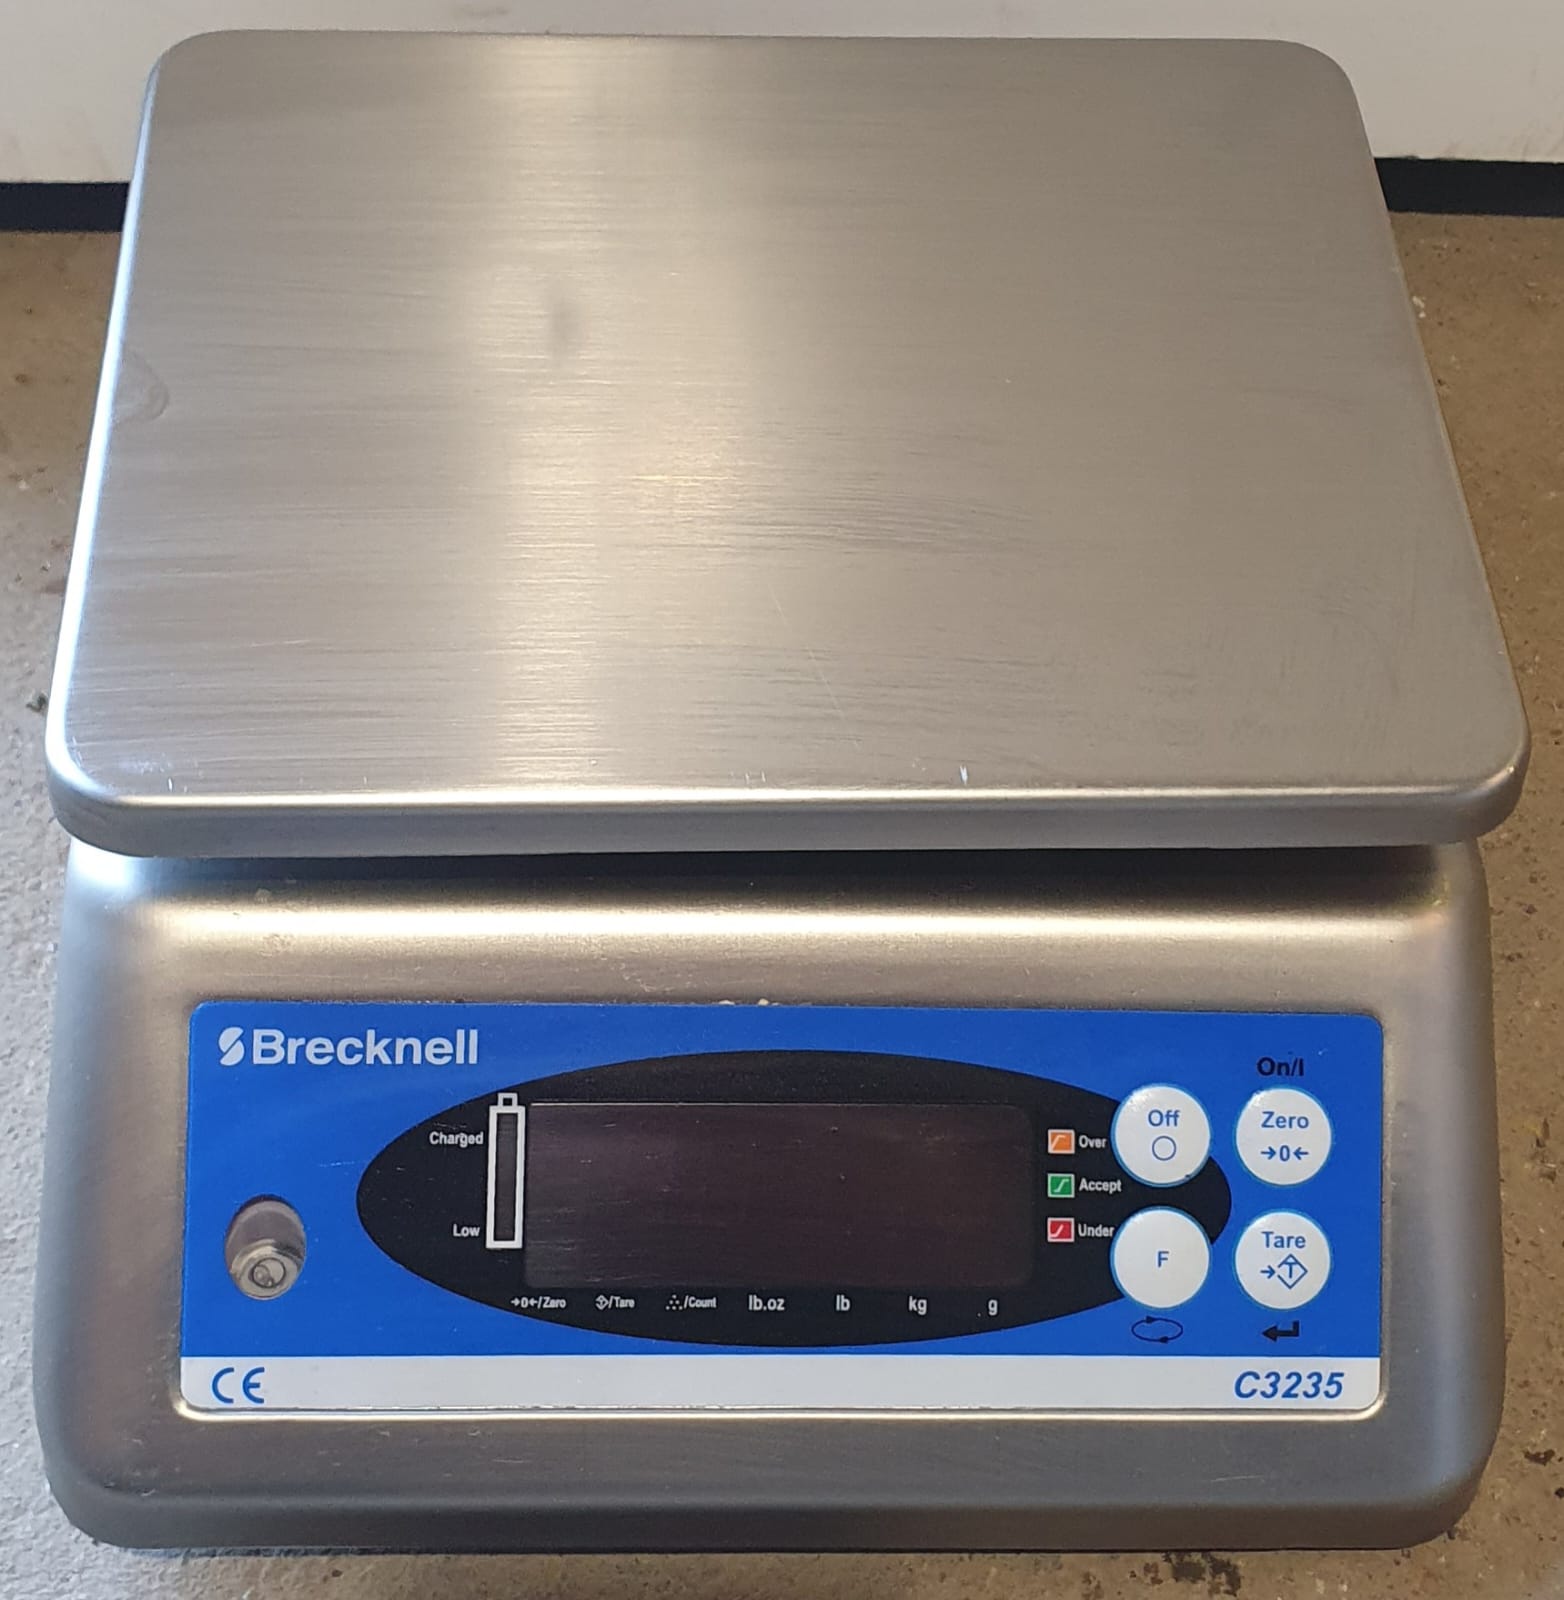 BRECKNELL C3235 Bench Scales.